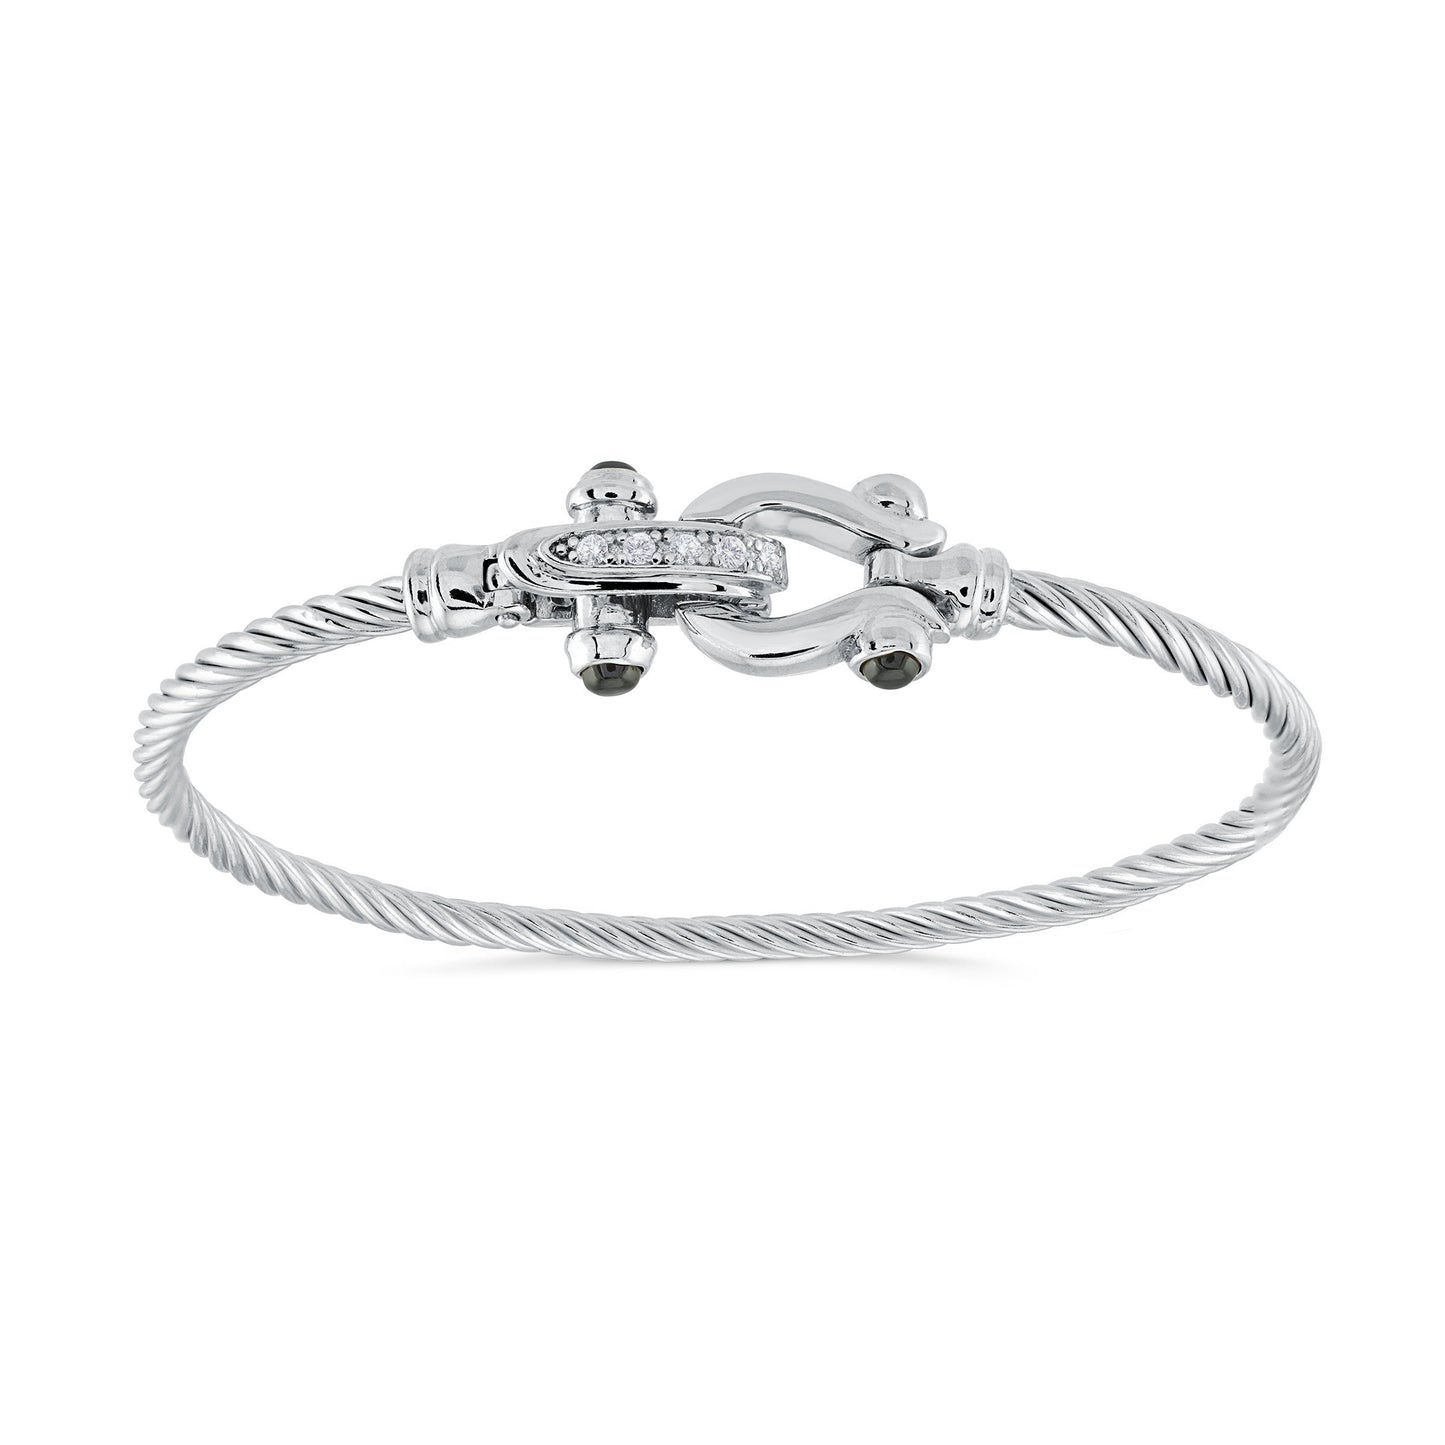 Sterling Silver Twist cable with equestrian buckle